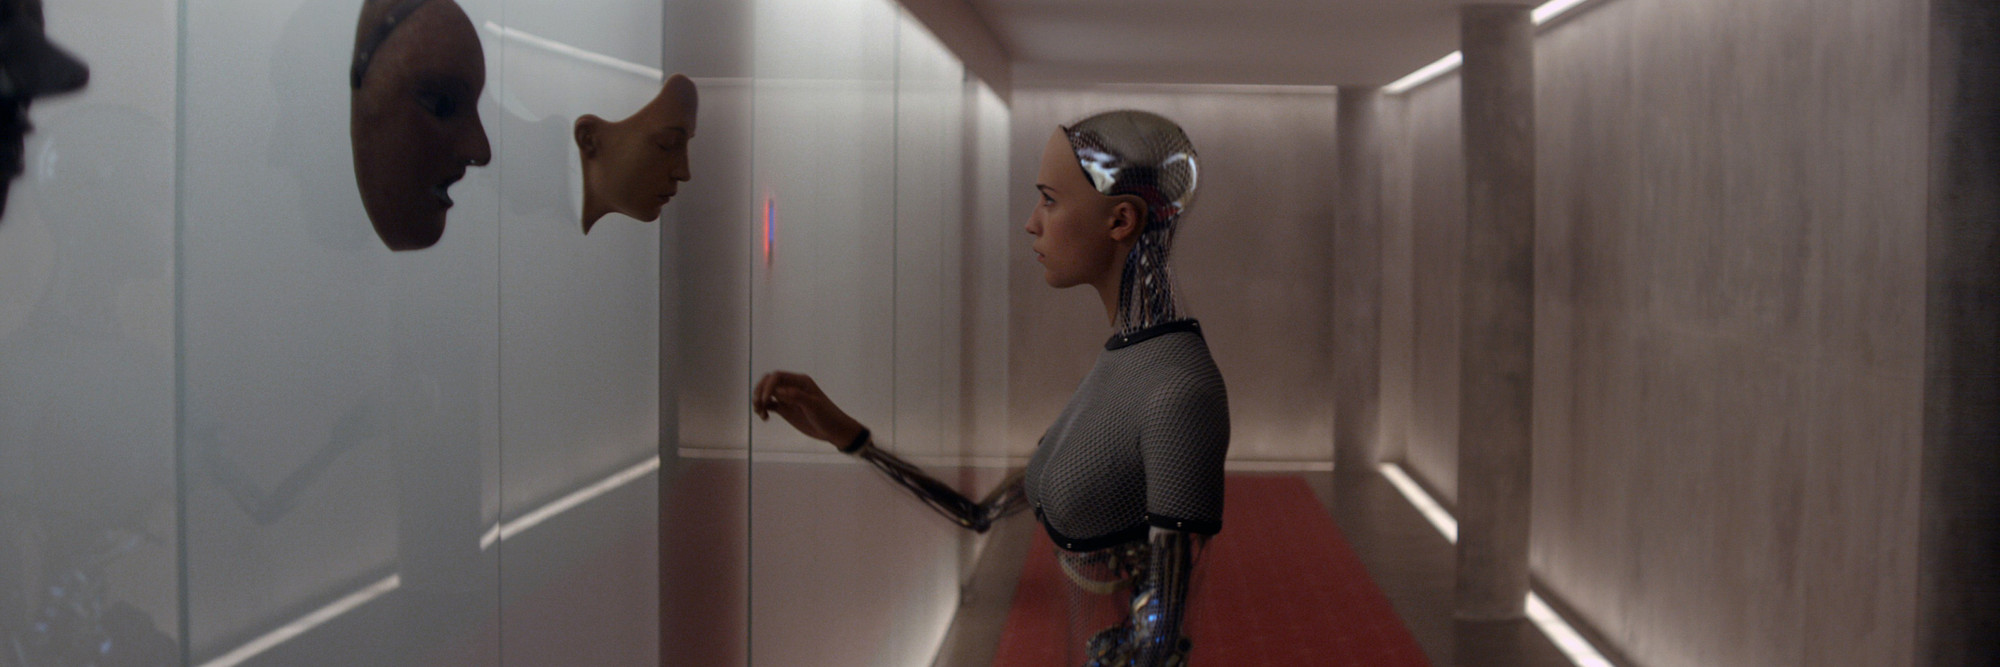 Ex Machina. 2015. Great Britain. Directed by Alex Garland. Courtesy Universal Pictures/Photofest. © Universal Pictures